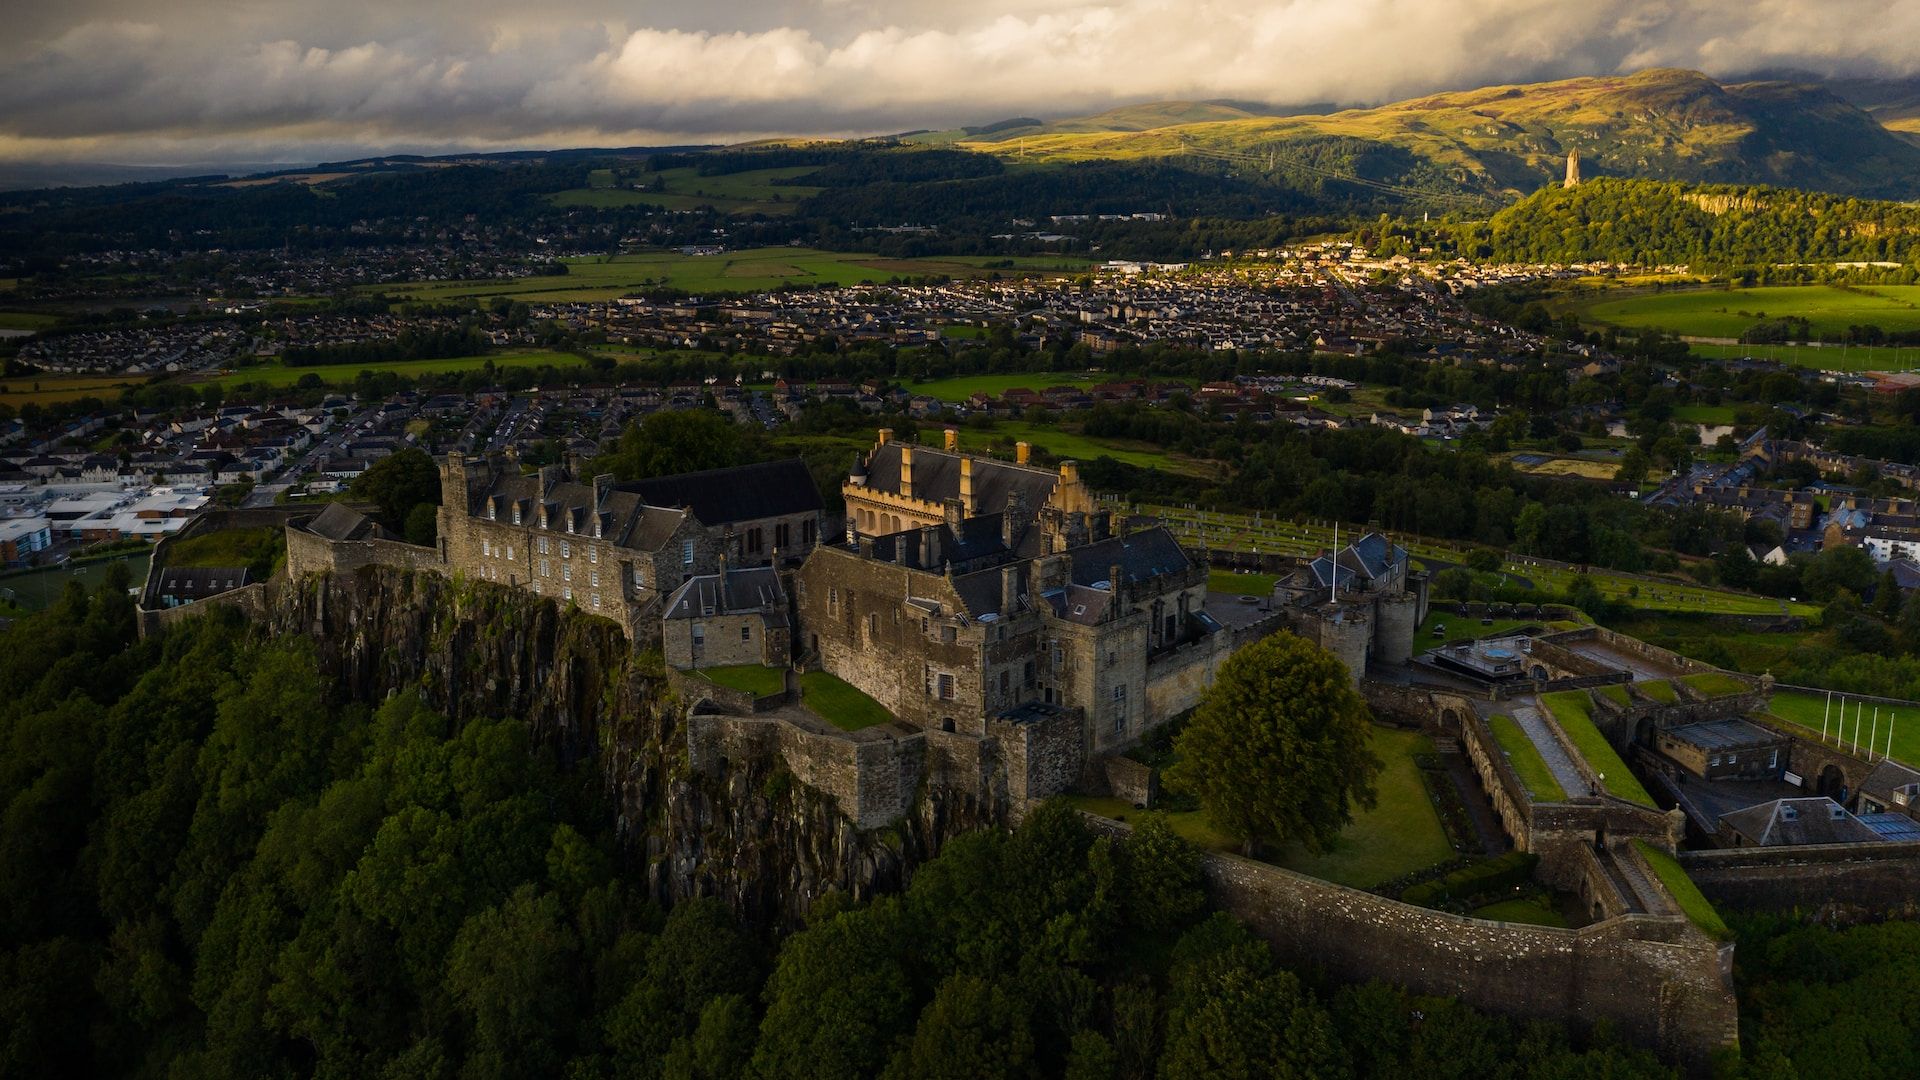 An aerial view of Stirling, Scotland